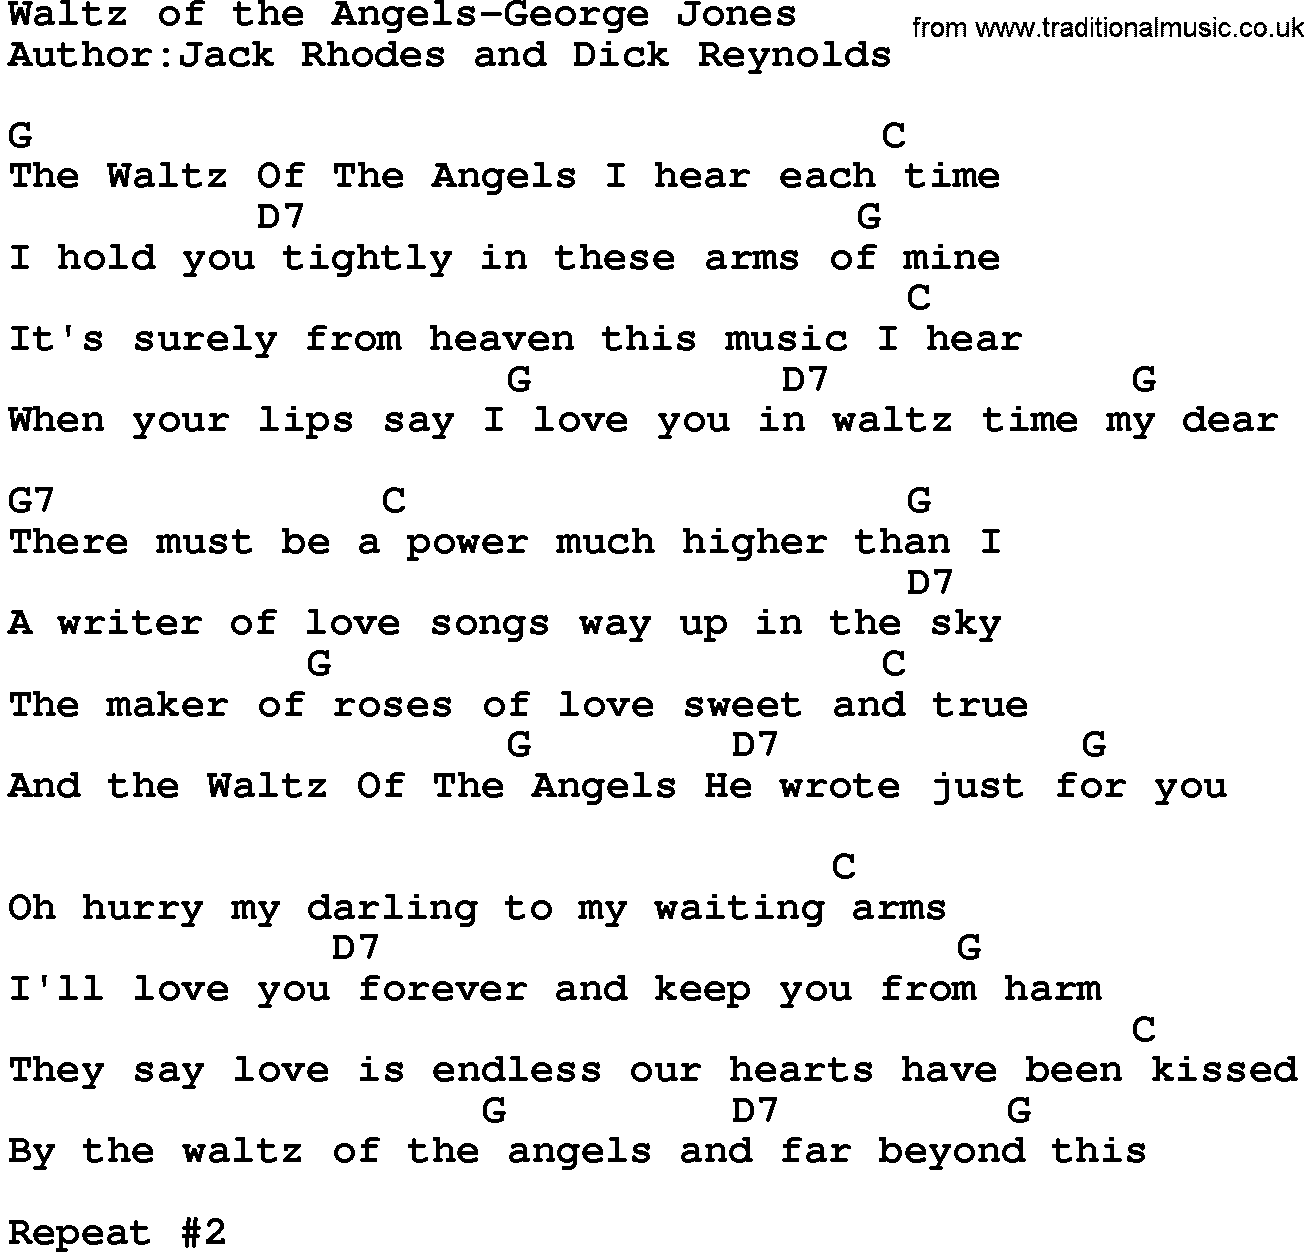 Country music song: Waltz Of The Angels-George Jones  lyrics and chords